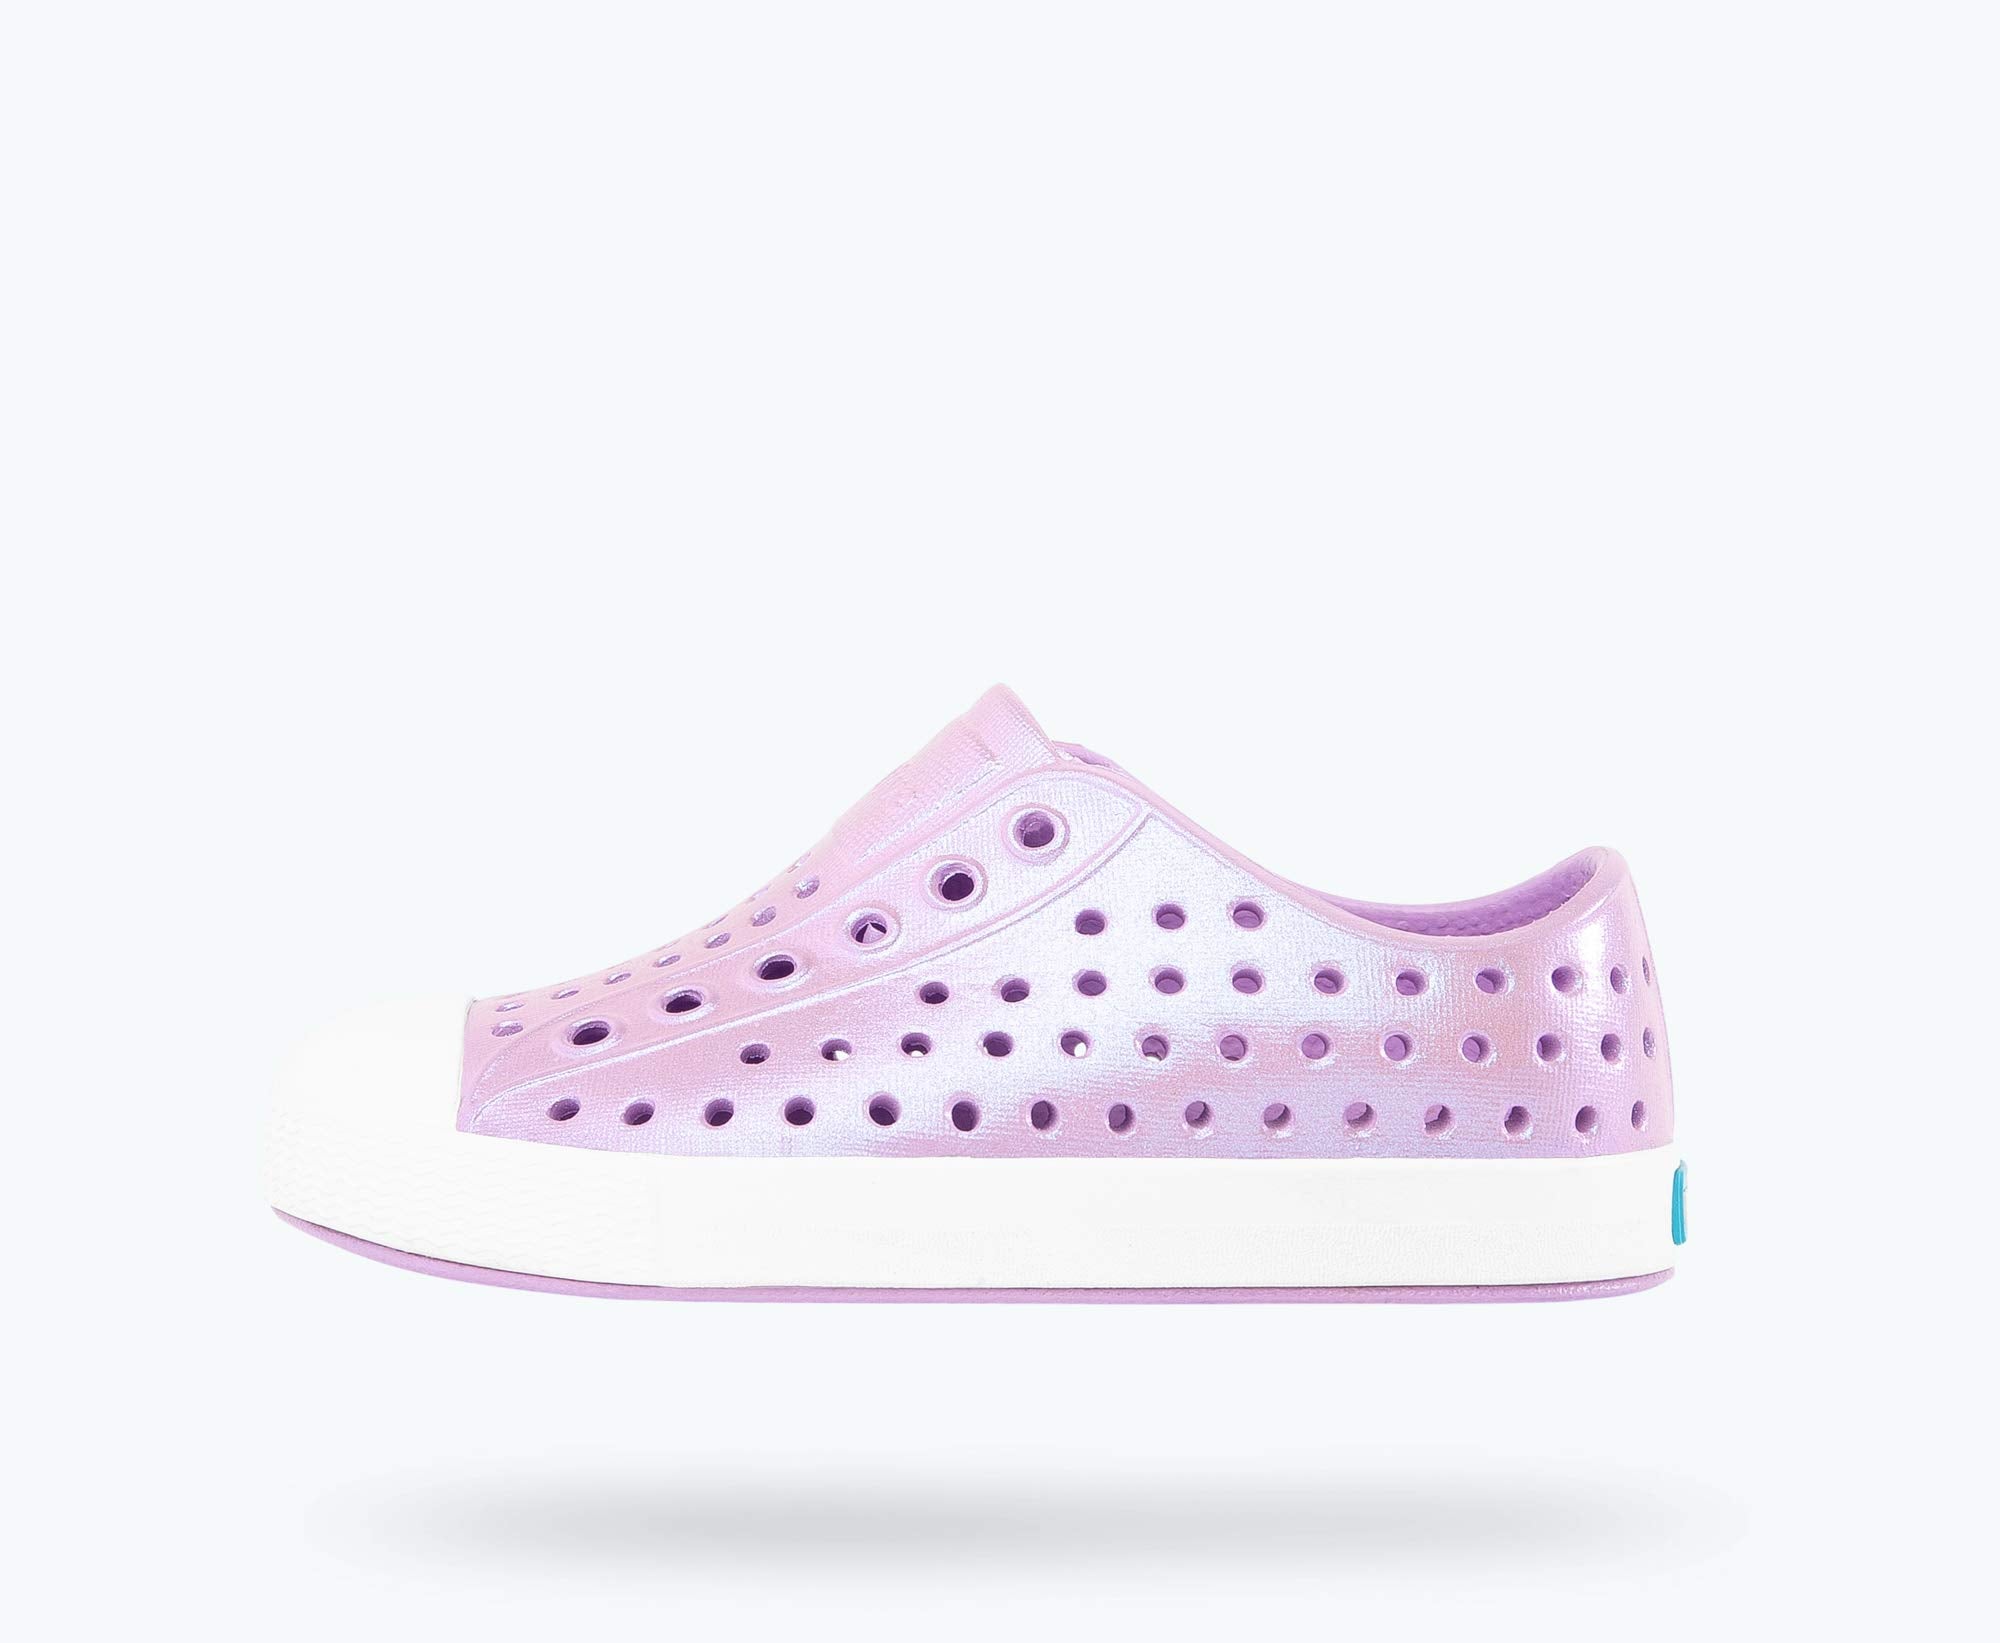 Native Shoes Girl's Jefferson Iridescent (Toddler/Little Kid) Lavender Purple/Shell White/Galaxy 5 Toddler M